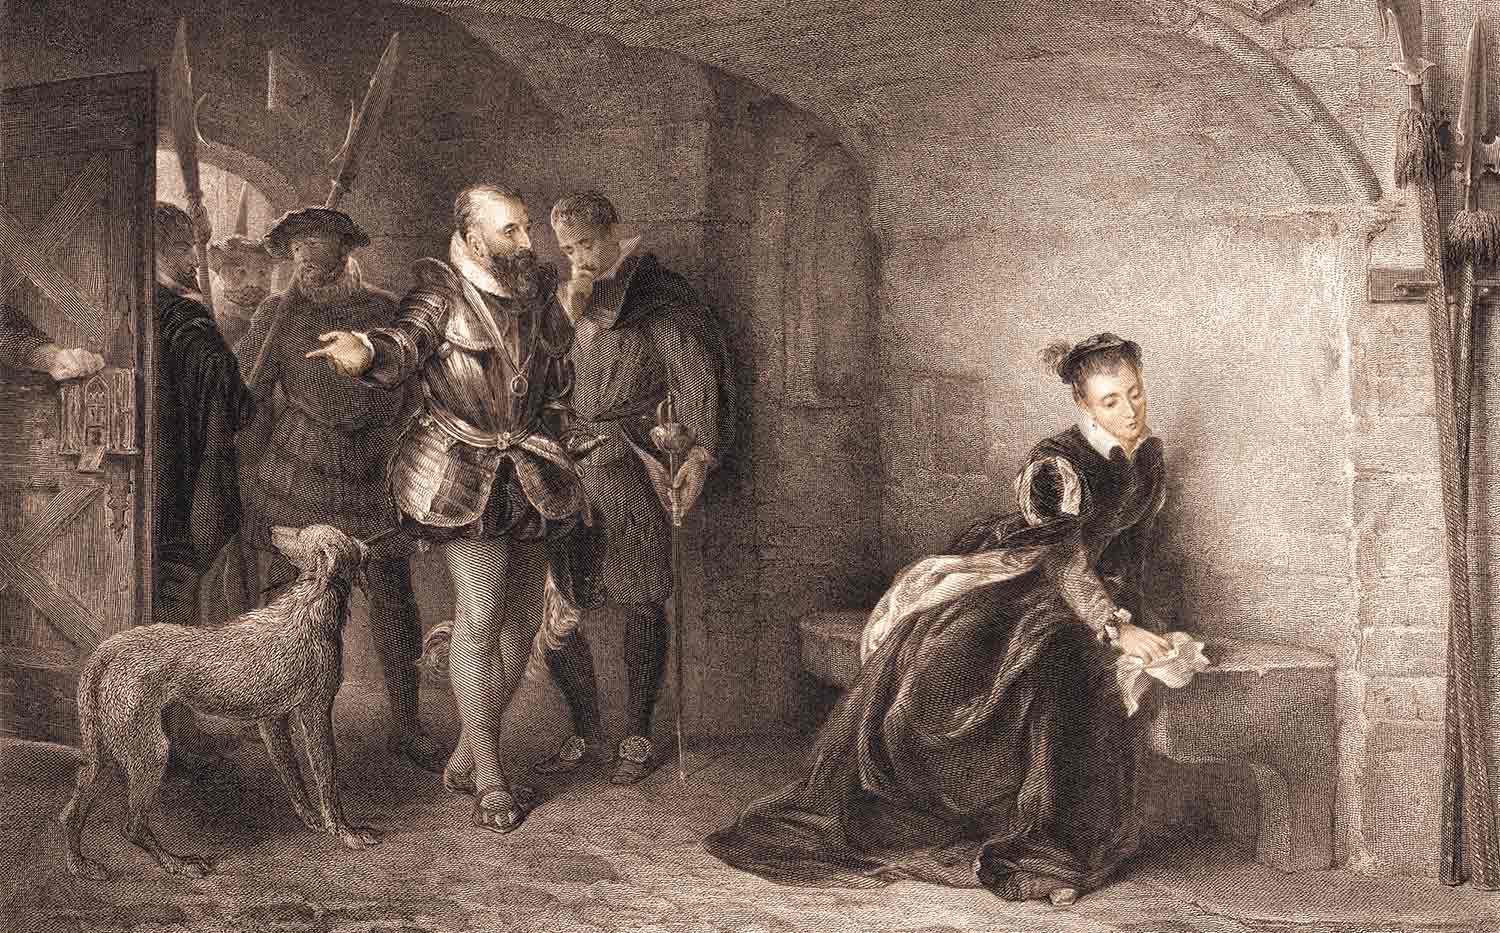 Princess Elizabeth sits on a stone bench in a chamber as several men enter the chamber.